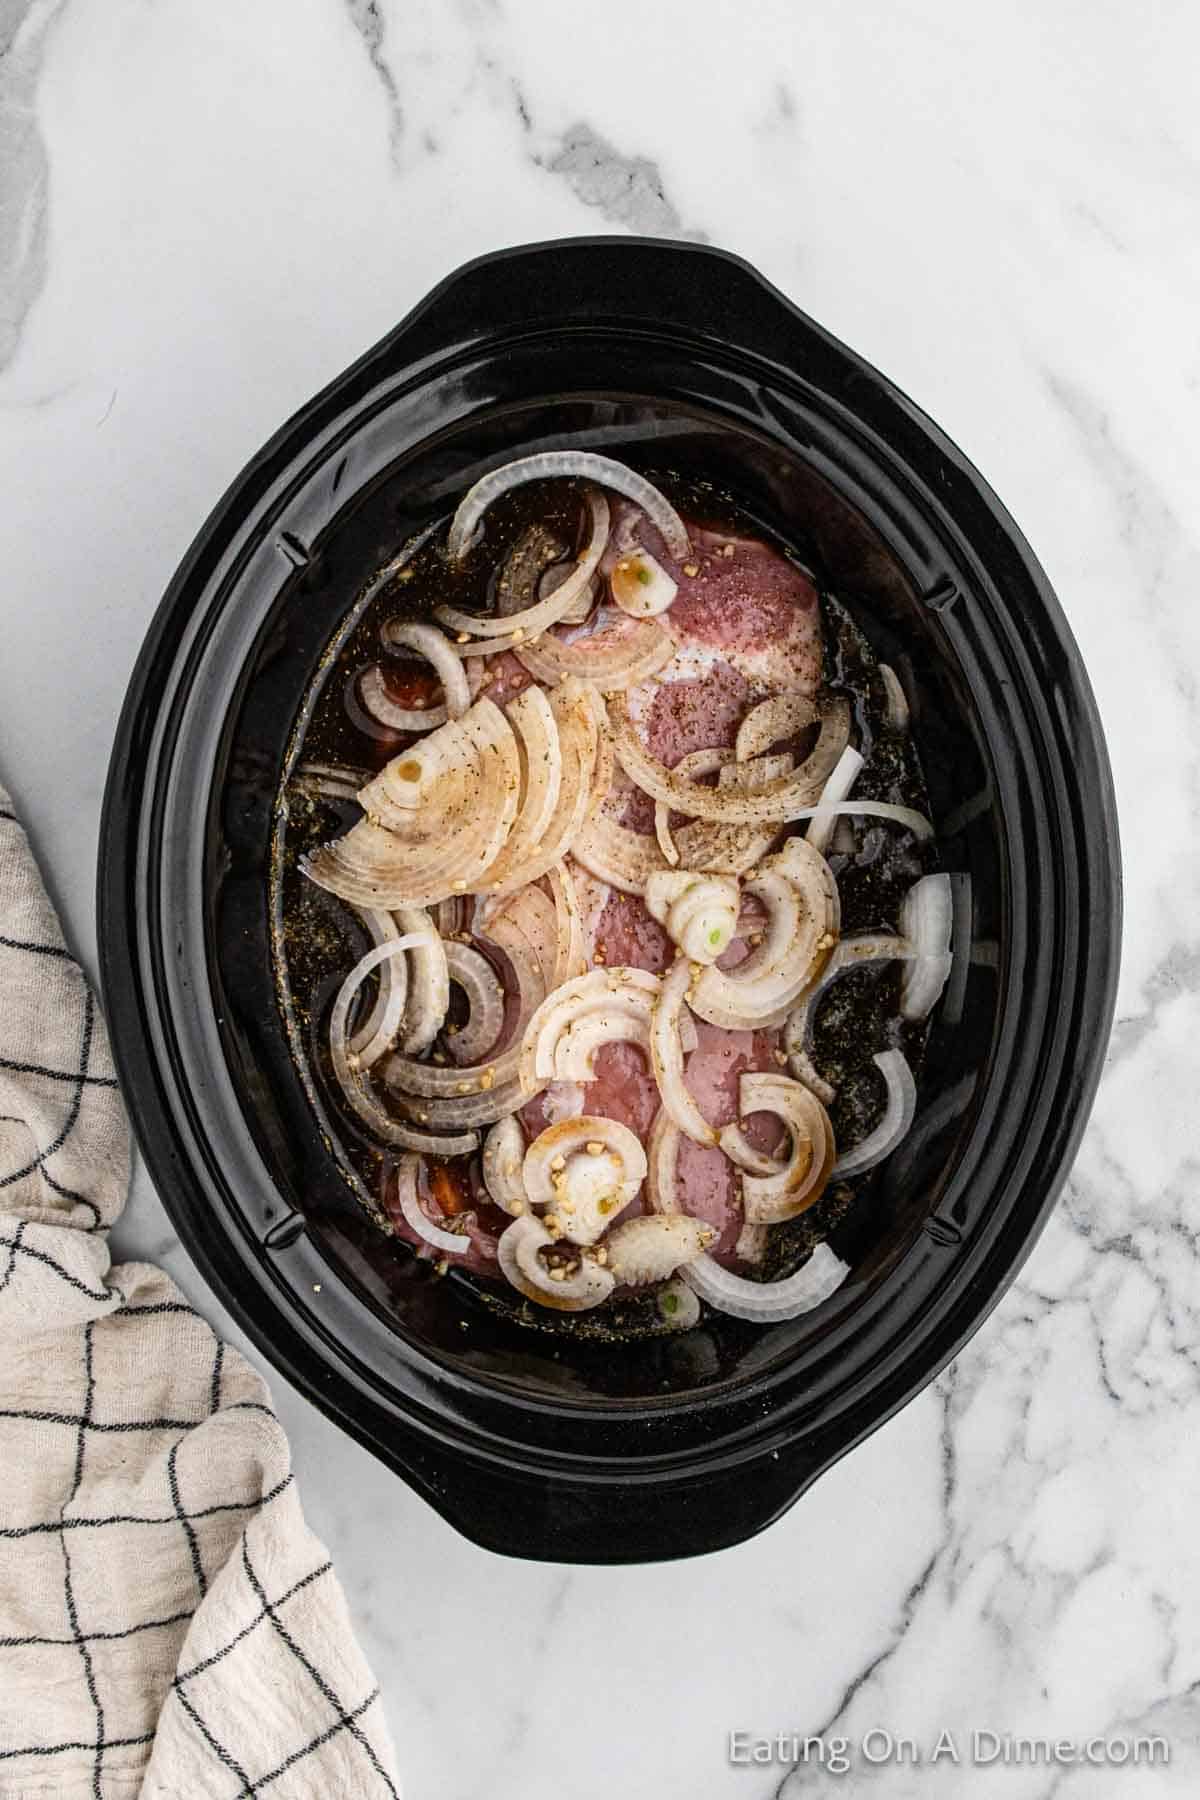 Pouring the sauce over the pork loin and onions in the slow cooker